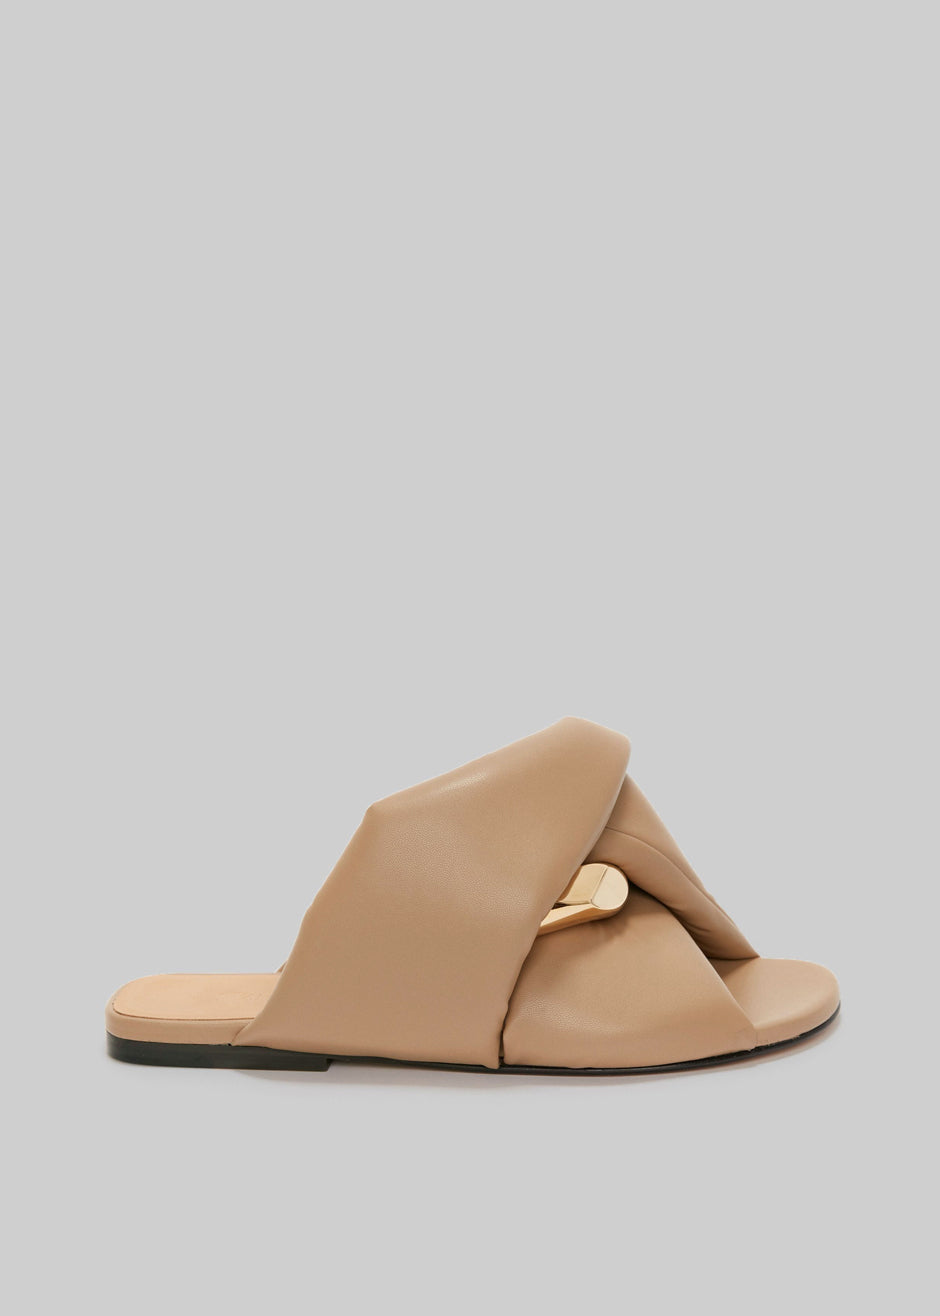 JW Anderson Chain Flat Sandals - Taupe - 1